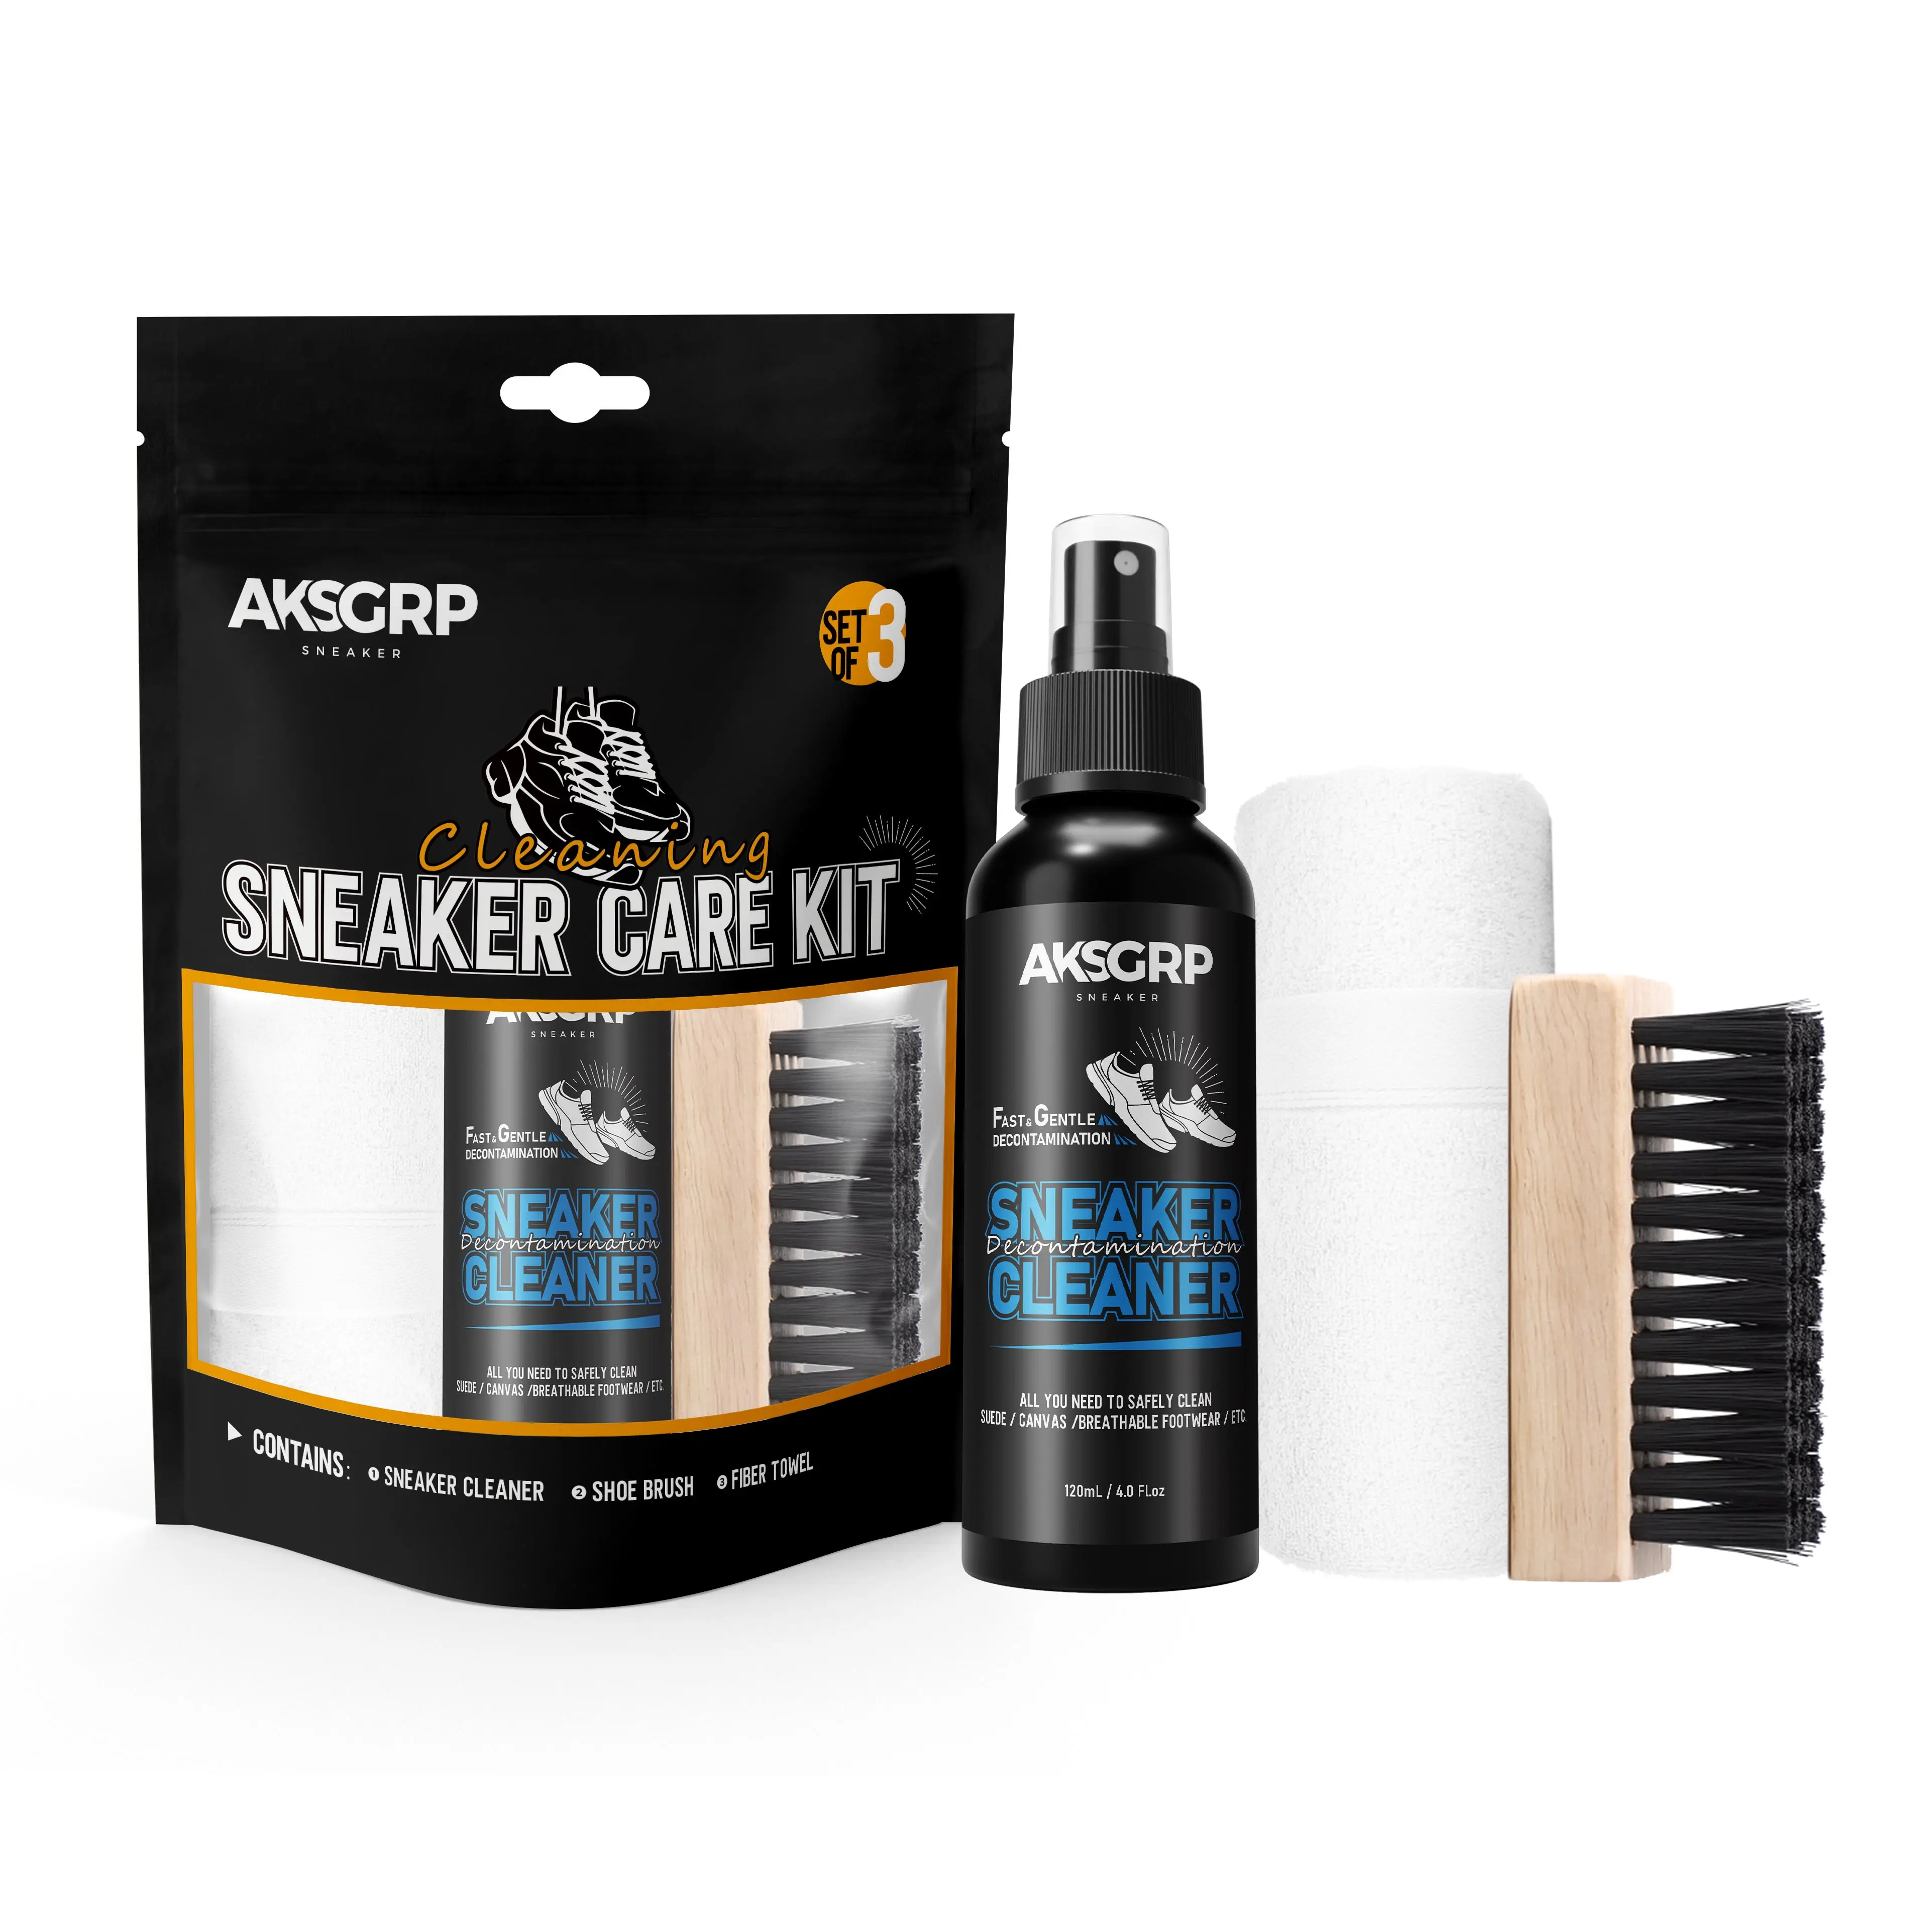 AKSGRP high quality cleaning shoe 3in1 with brush cleaner shoe care kit in oem bag Shoe cleaning